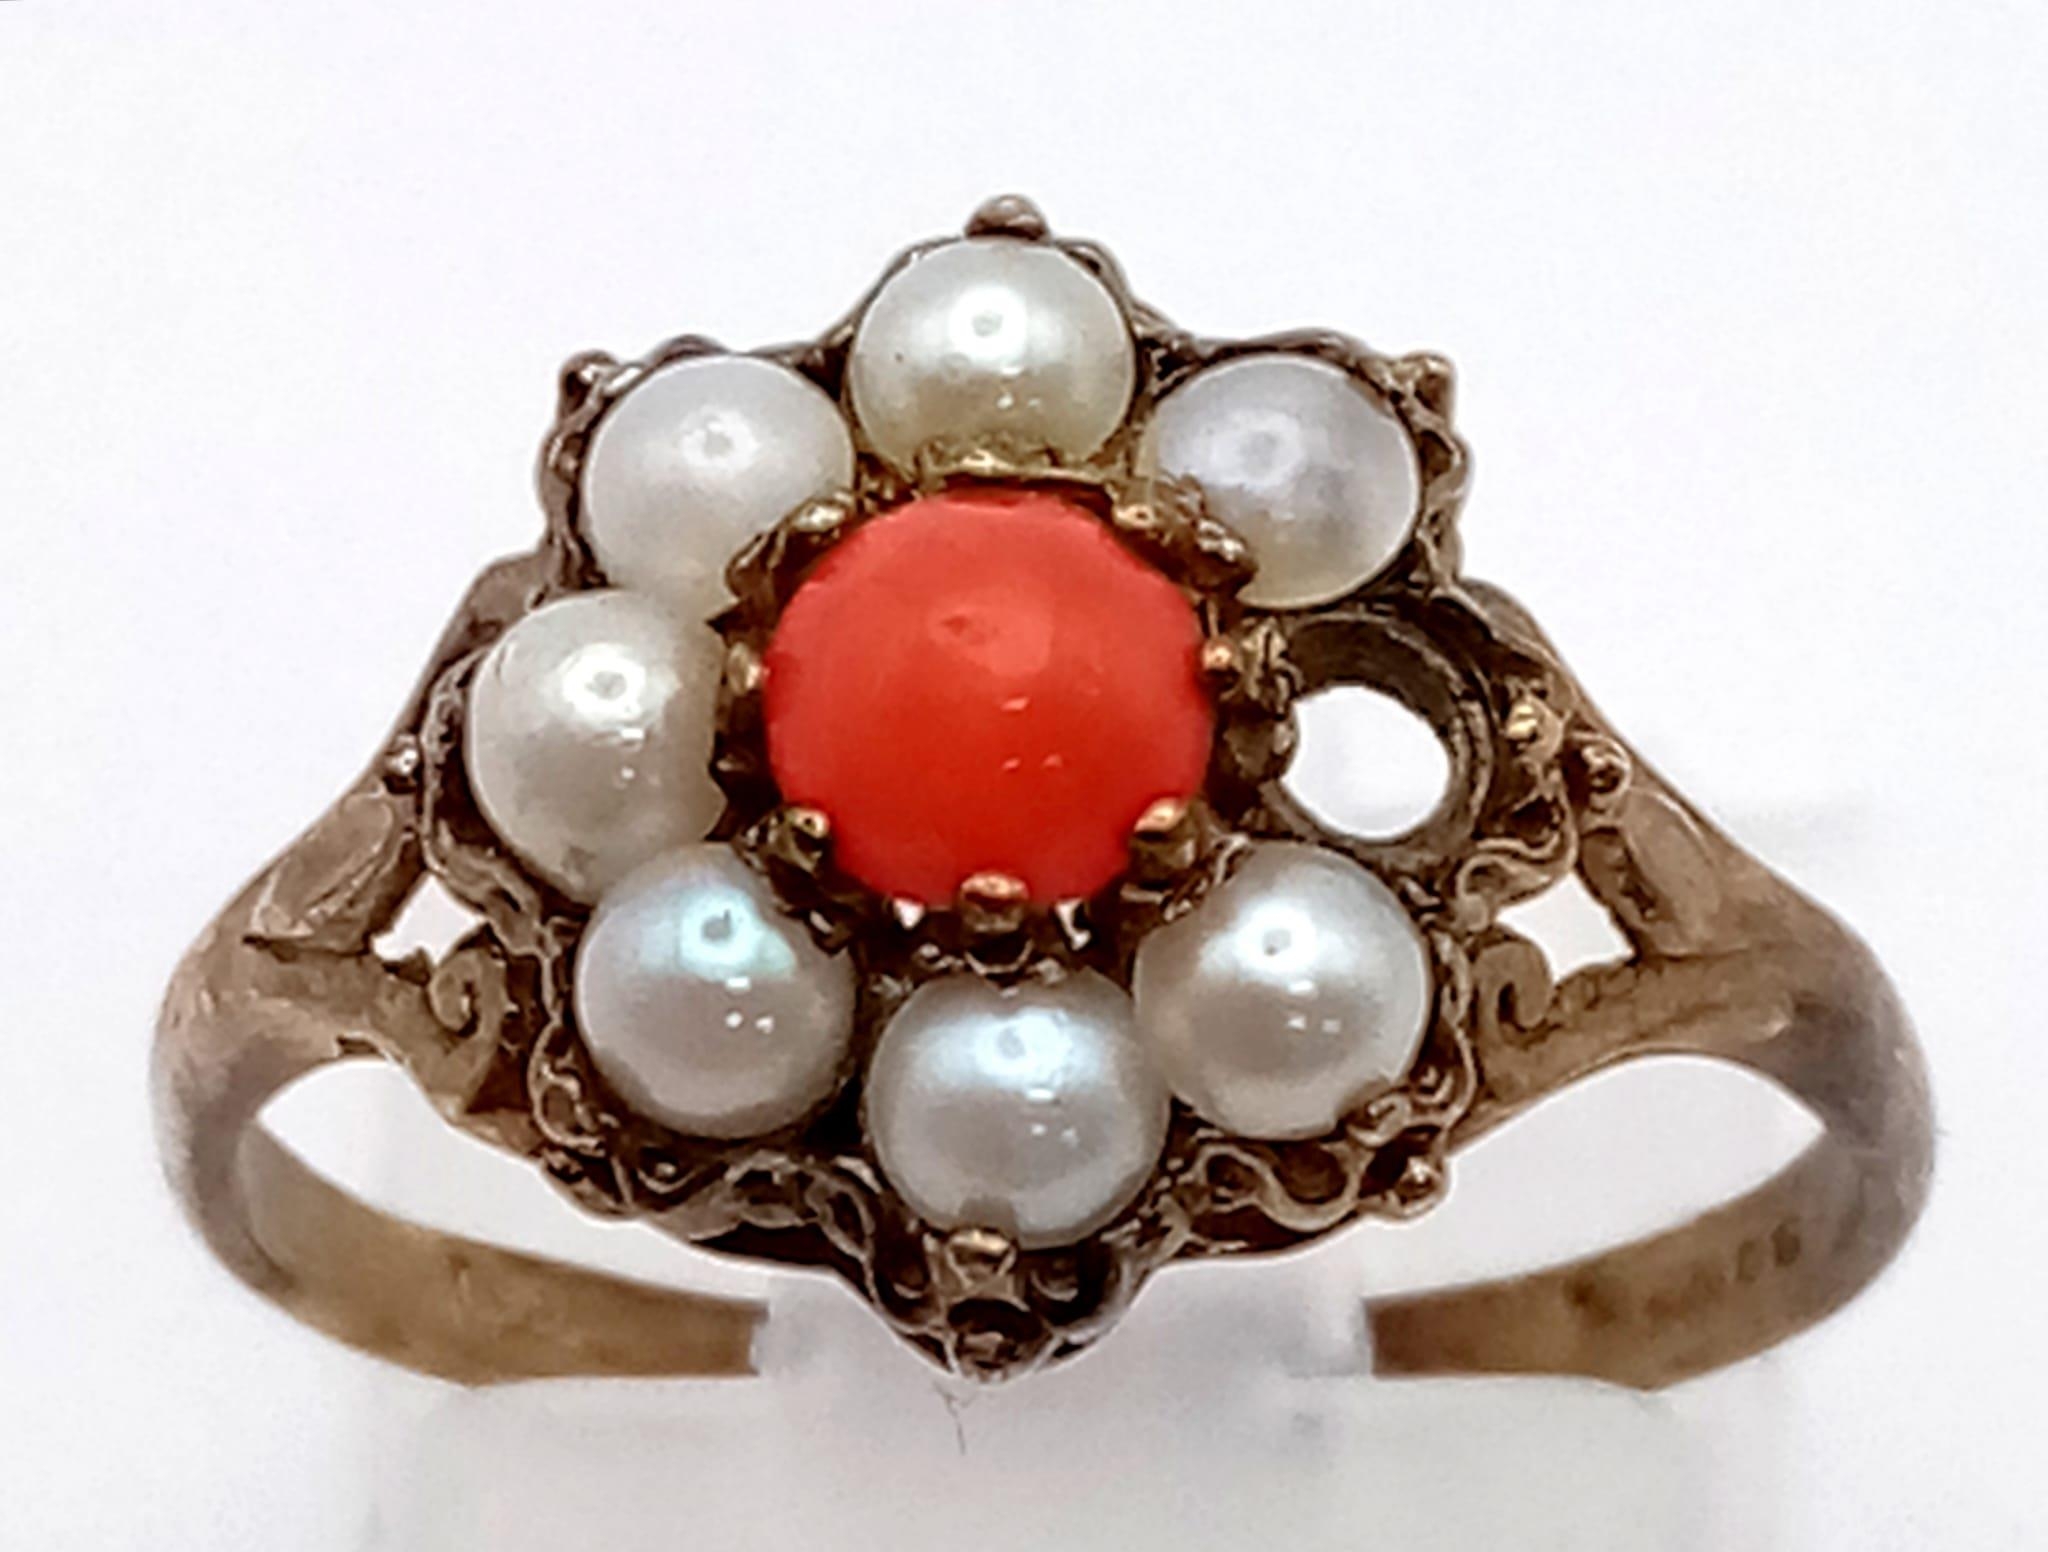 A 9K Gold Vintage Seed Pearl and Coral Ring. Missing a seed pearl so a/f. Size O. 2g total weight.